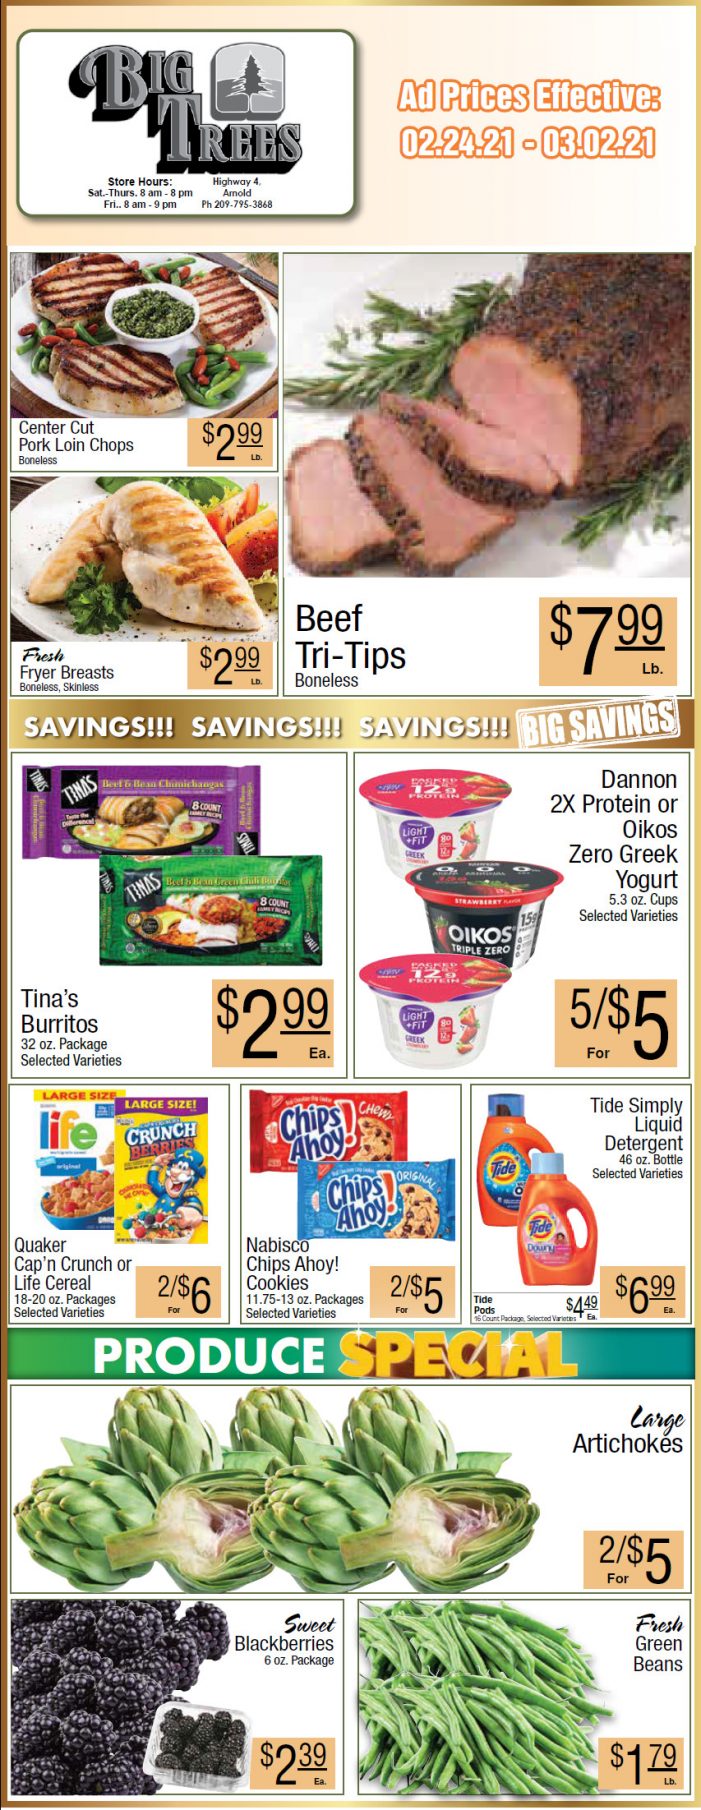 Big Trees Market Weekly Ad & Grocery Specials Through March 2nd!